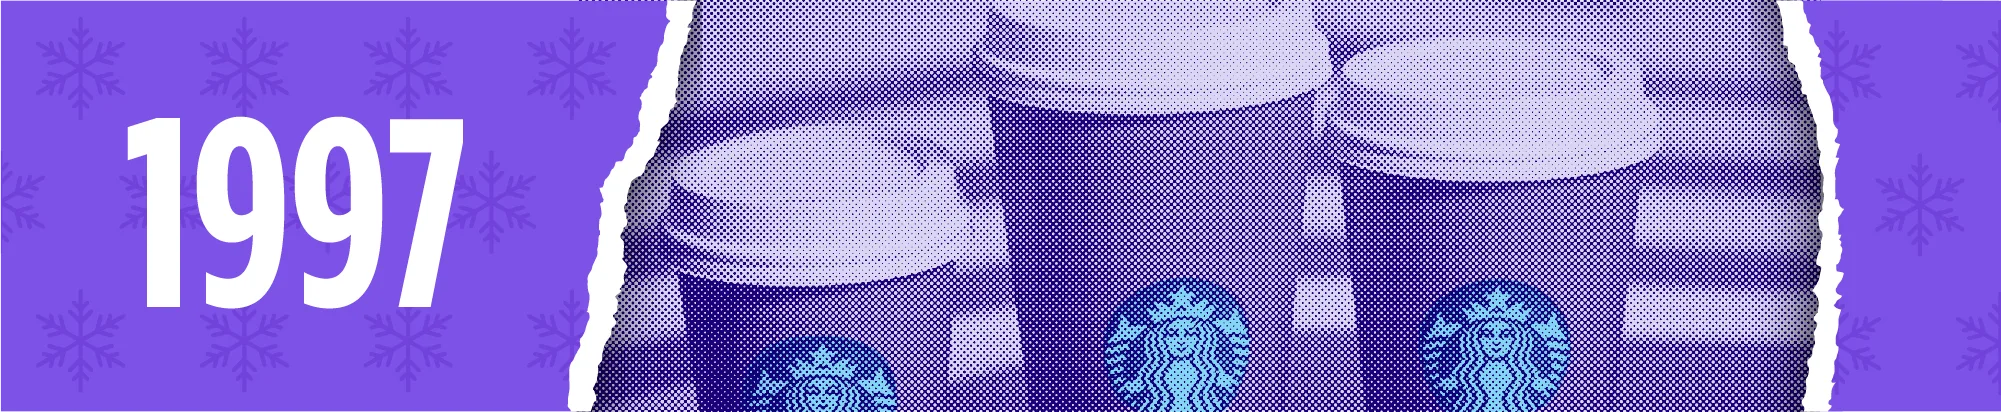 Starbucks Red Cups Spark Consumer Salivating (and Controversy